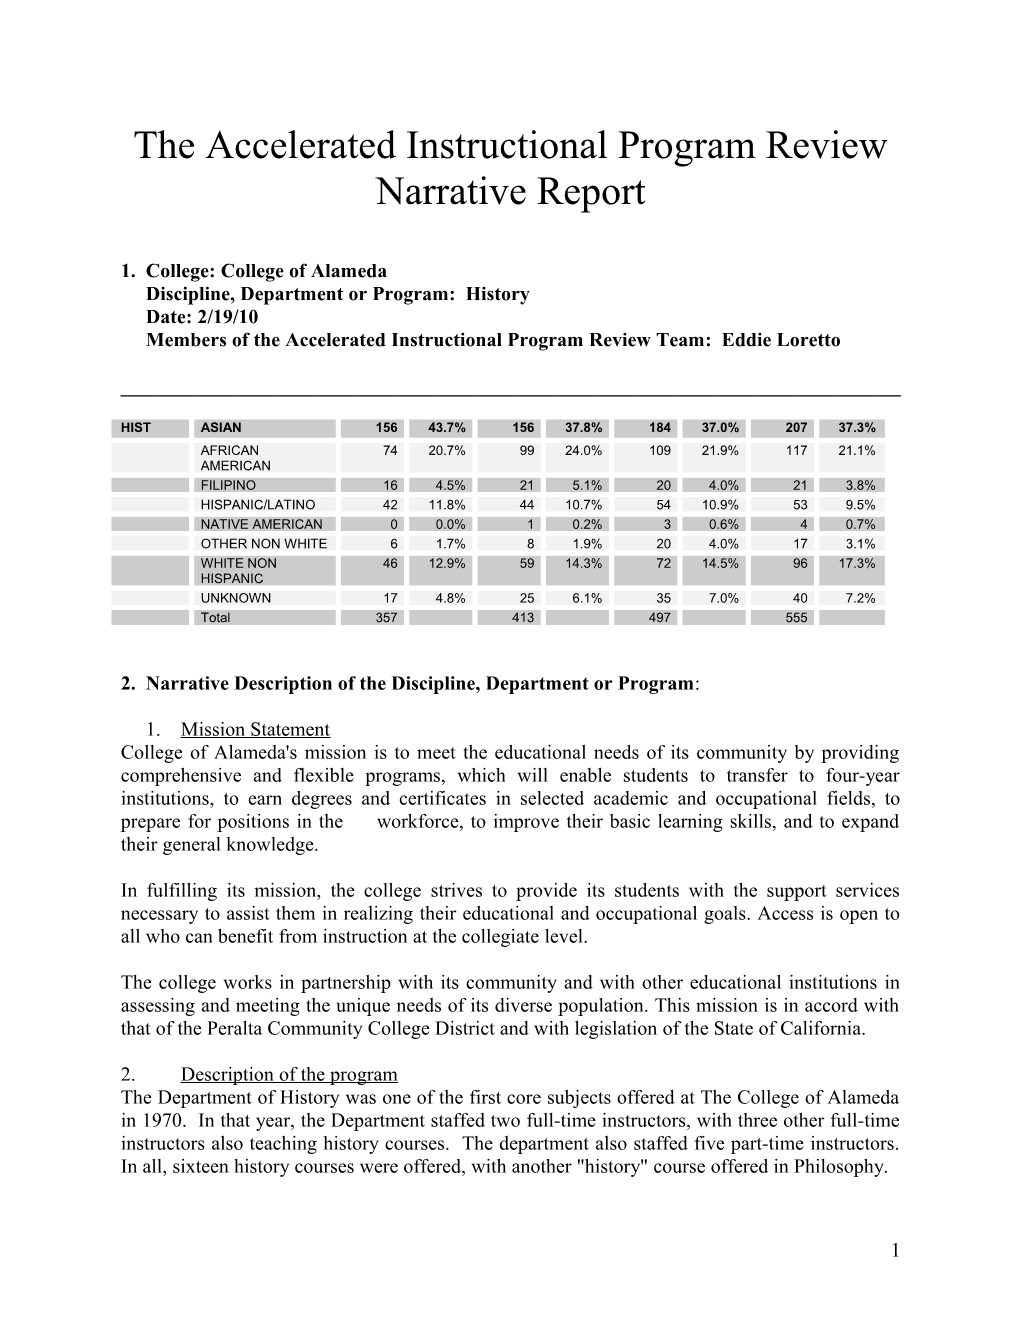 The Accelerated Instructional Program Review Narrative Report